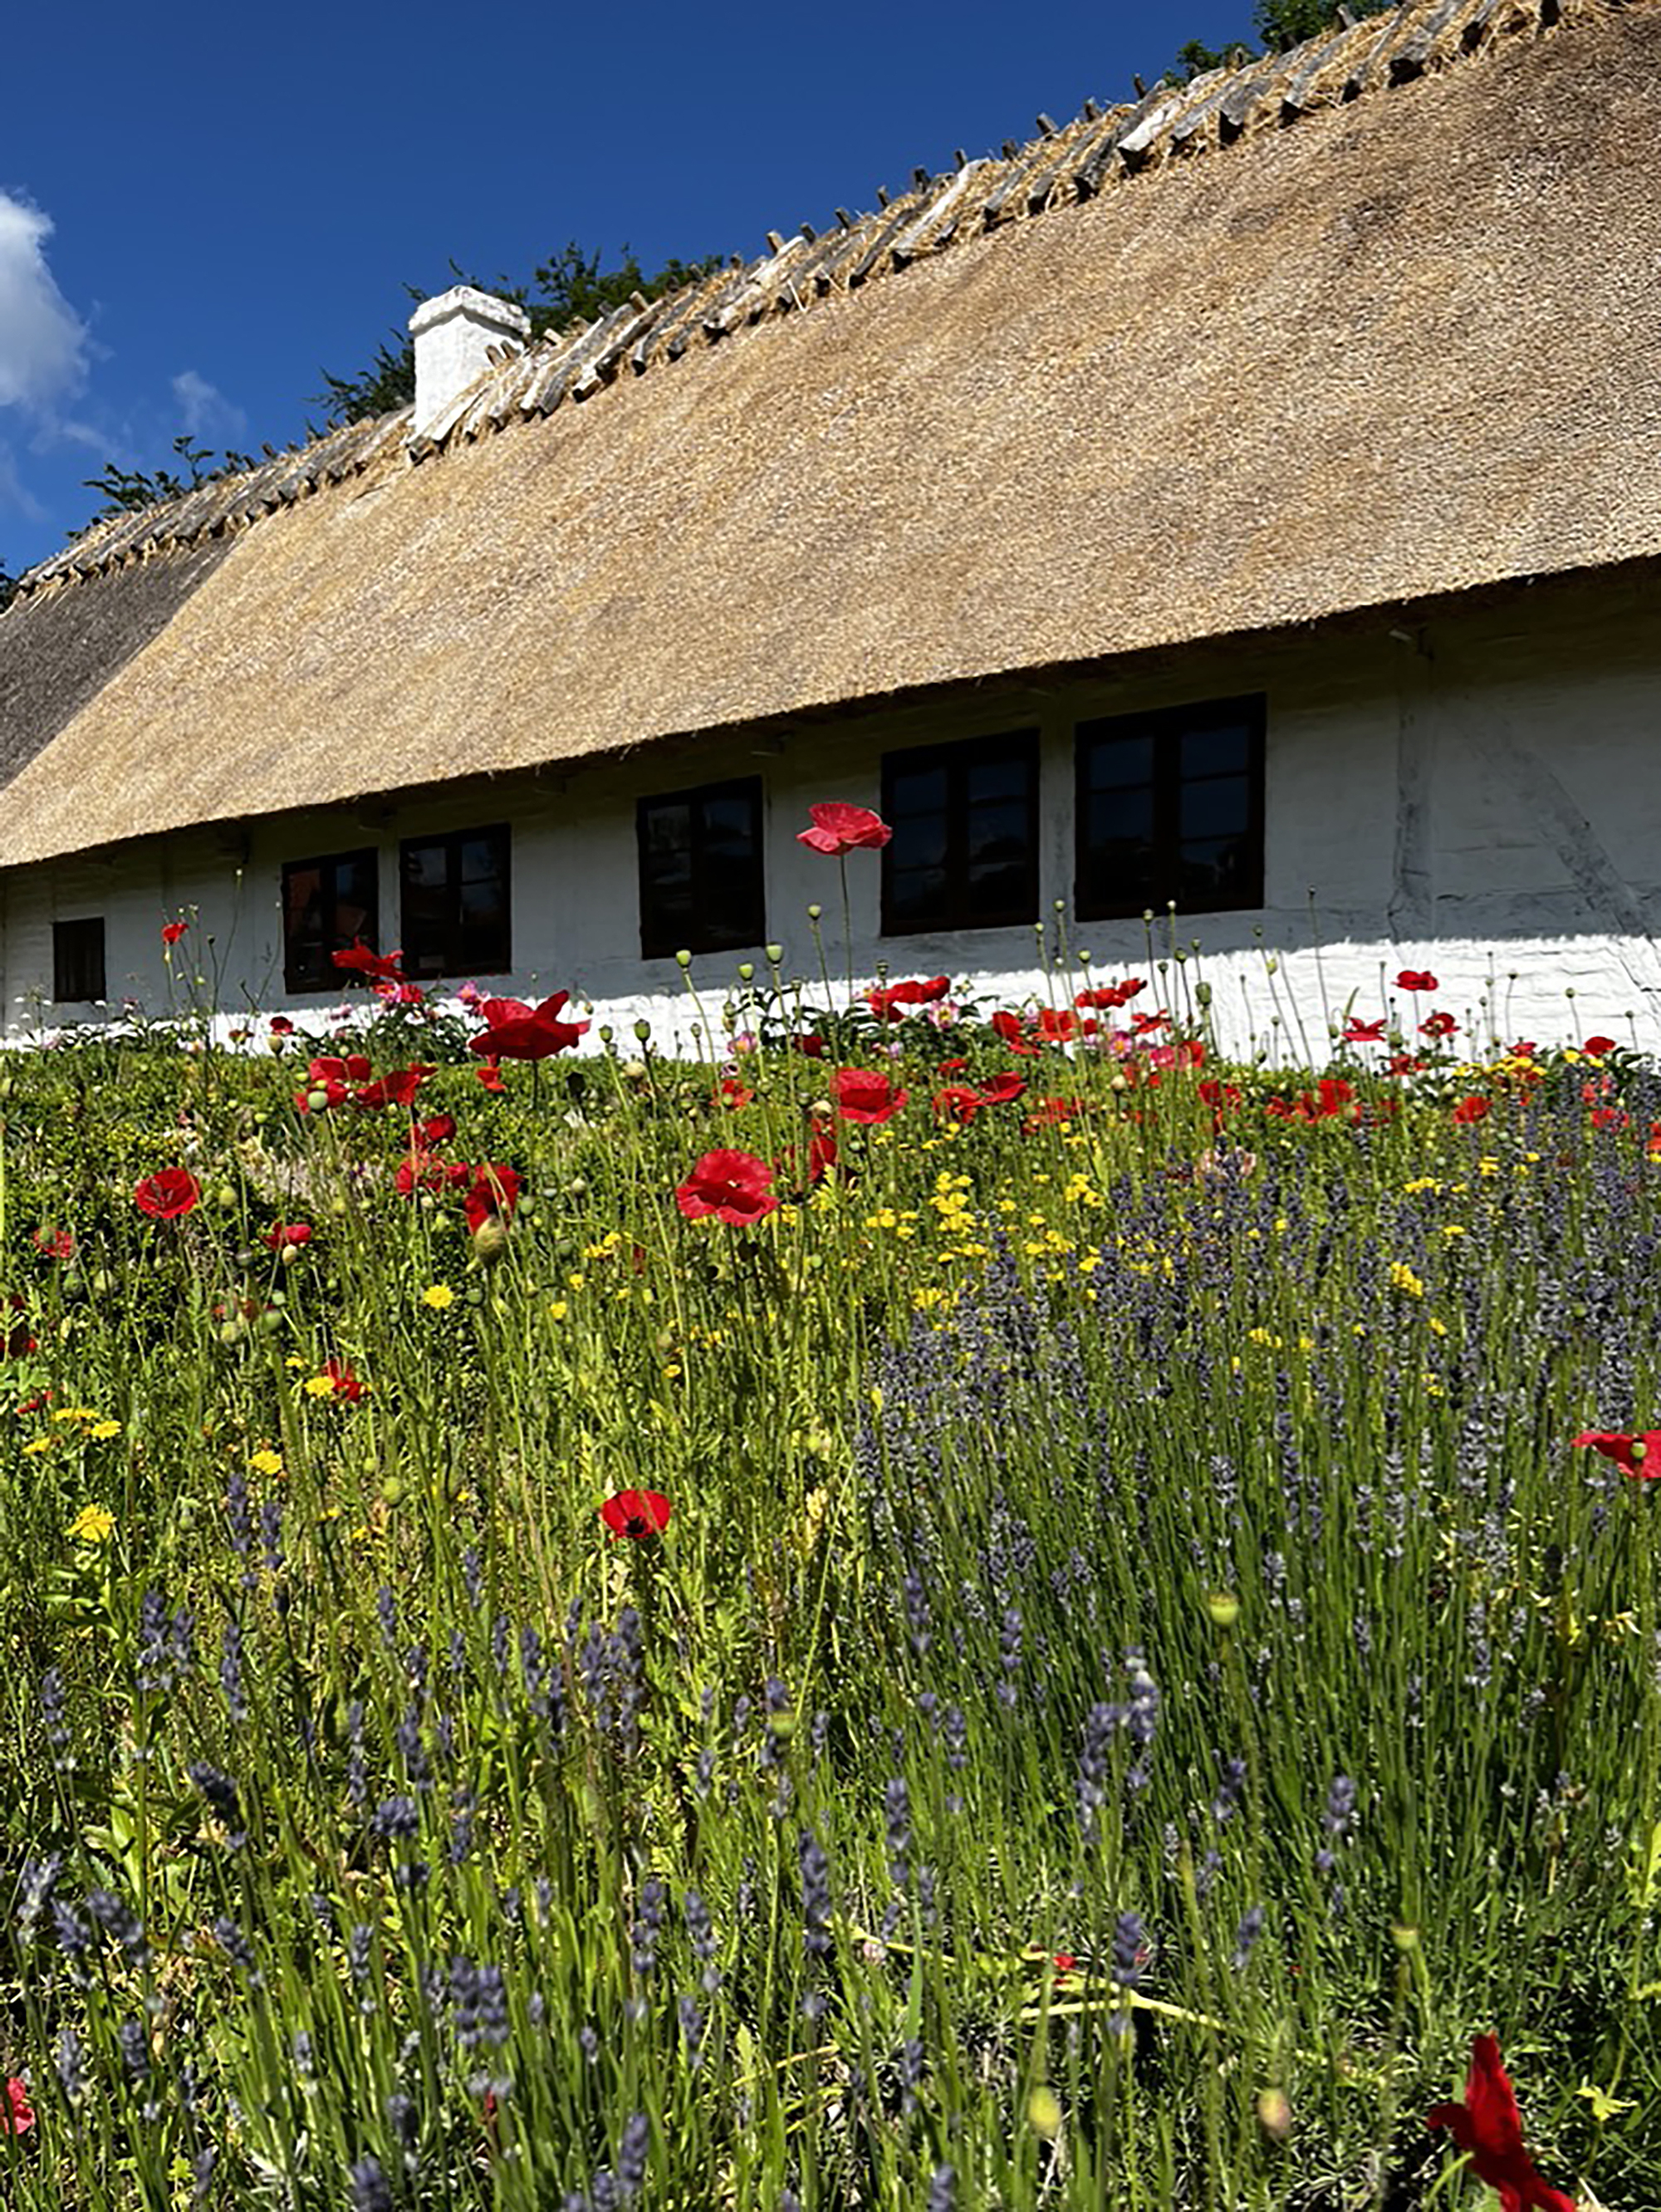 thatched-roof cottage in Denmark